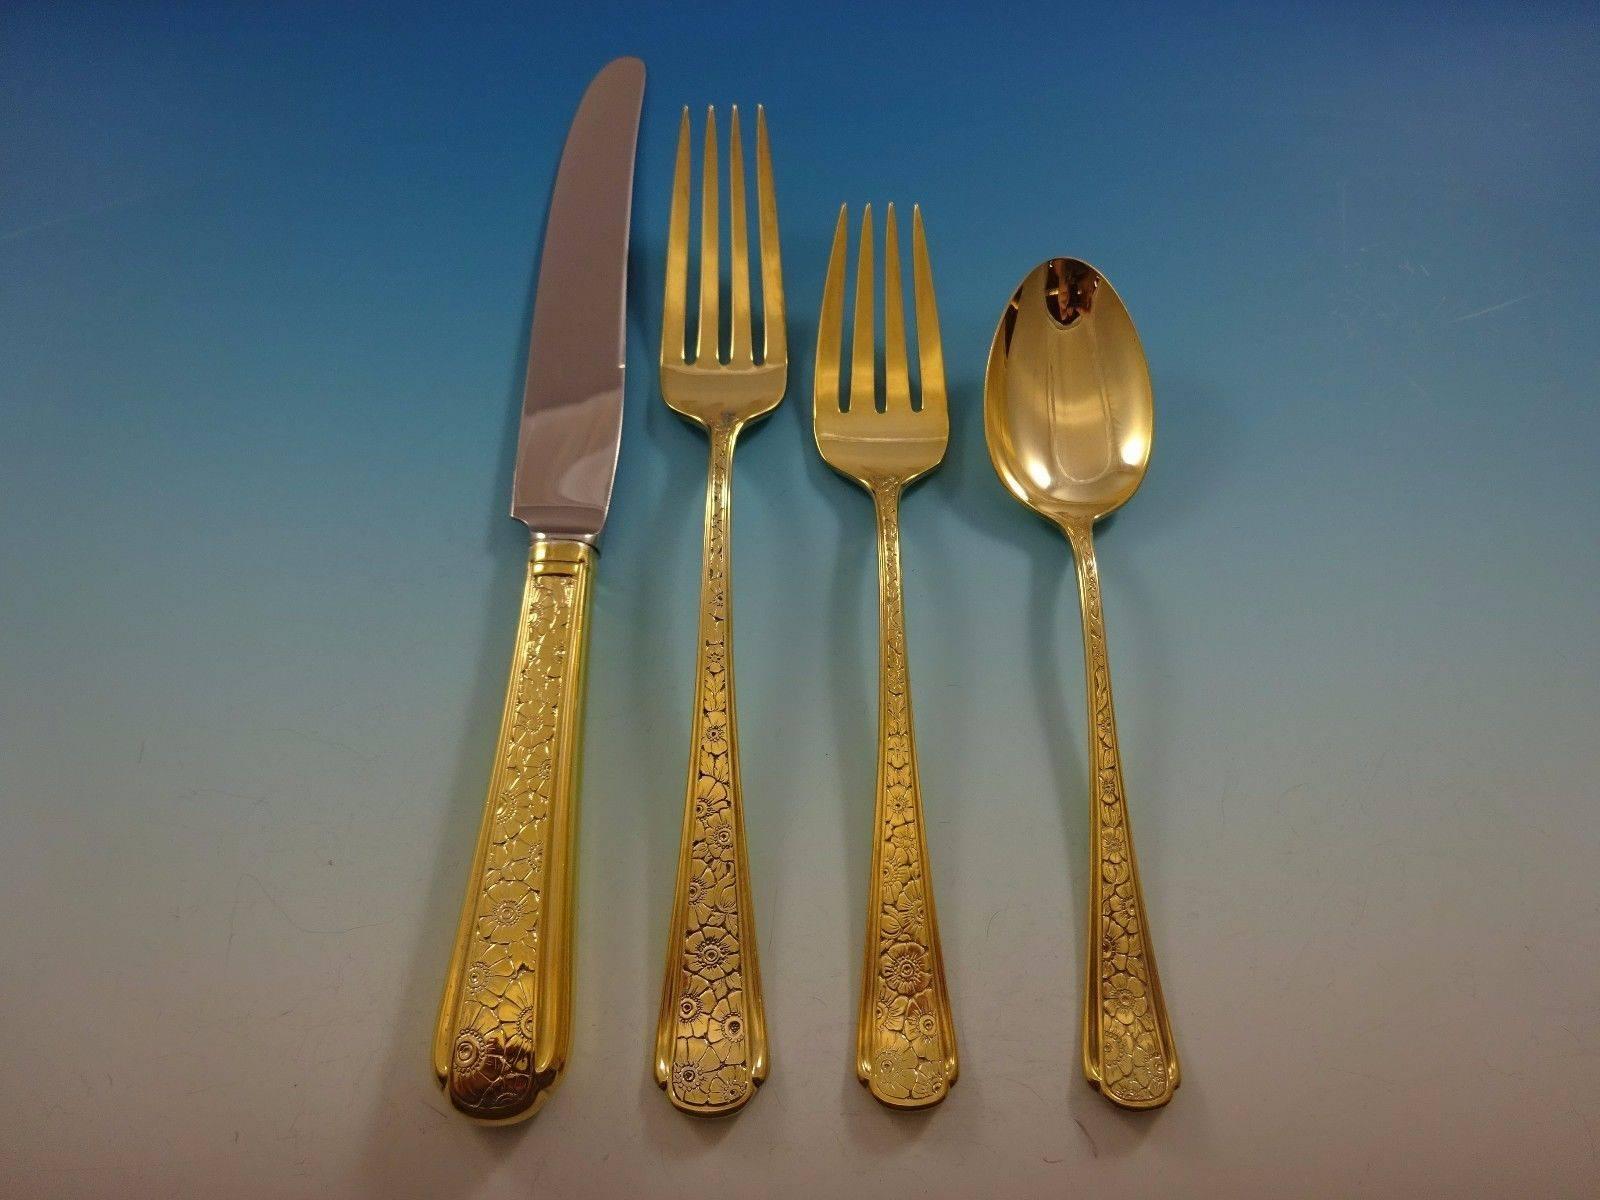 Impressive Old Brocade Gold by Towle Sterling Silver flatware set - 24 pieces.This set is vermeil (completely gold-washed) and includes: 

6 Knives, 8 3/4